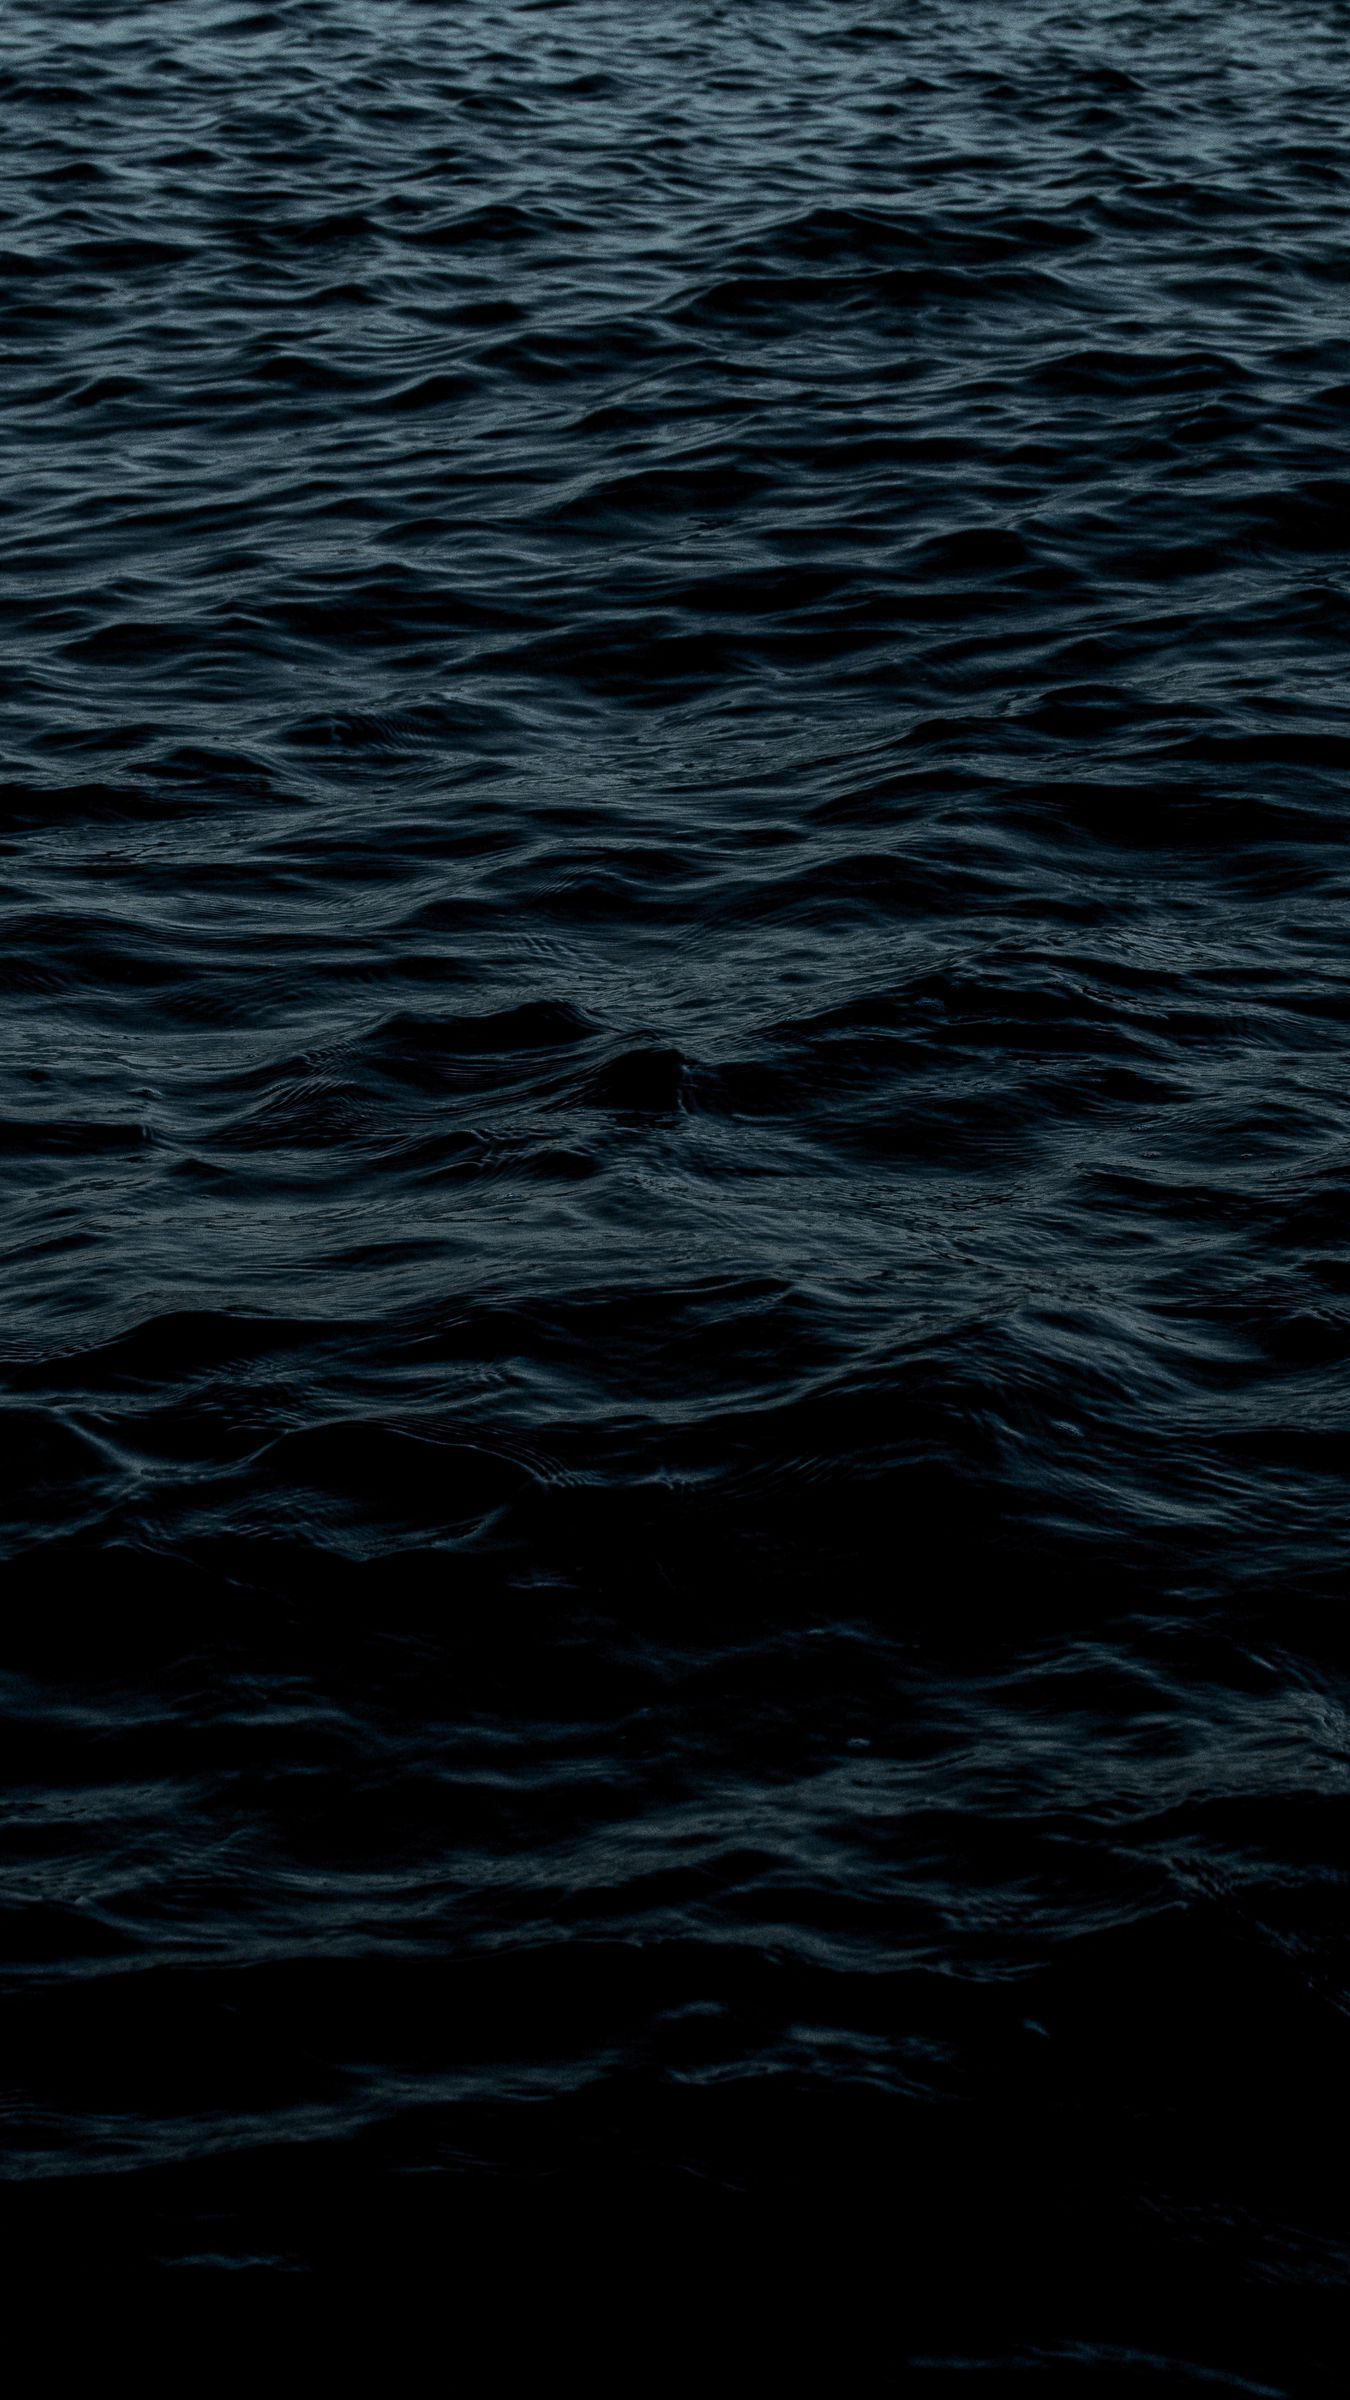 Download wallpaper 1350x2400 waves, dark, water, ripples iphone 8+/7+/6s+/for parallax HD background